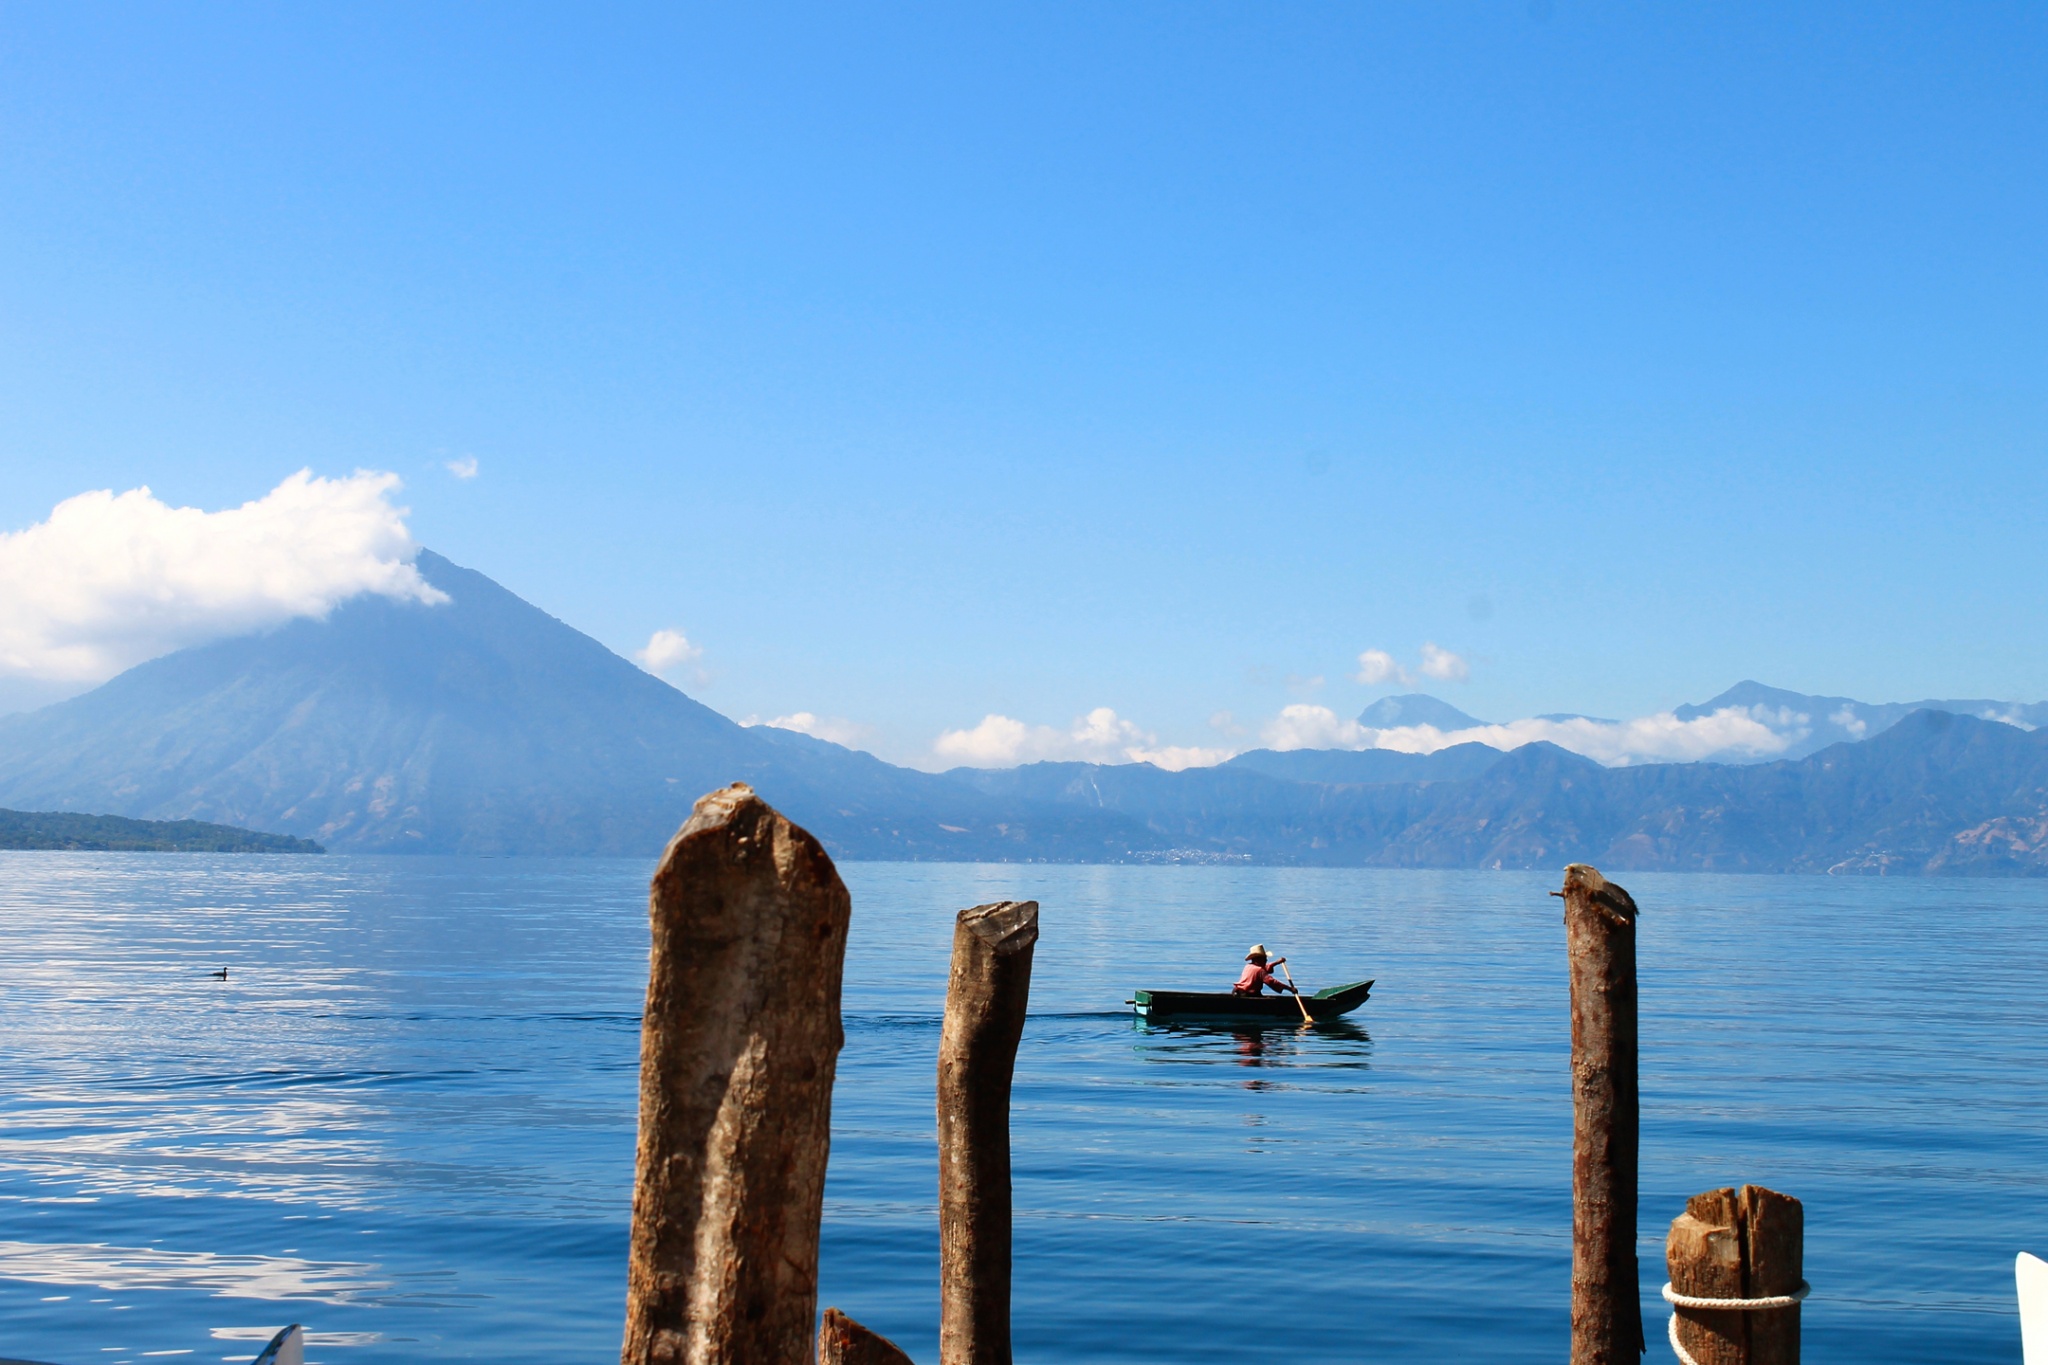 Lake Atitlan, view of the lake and the volcanoes from the dock in Santa Catarina Palopó. Photo: Paula Bendfeldt-Diaz, all rights reserved.